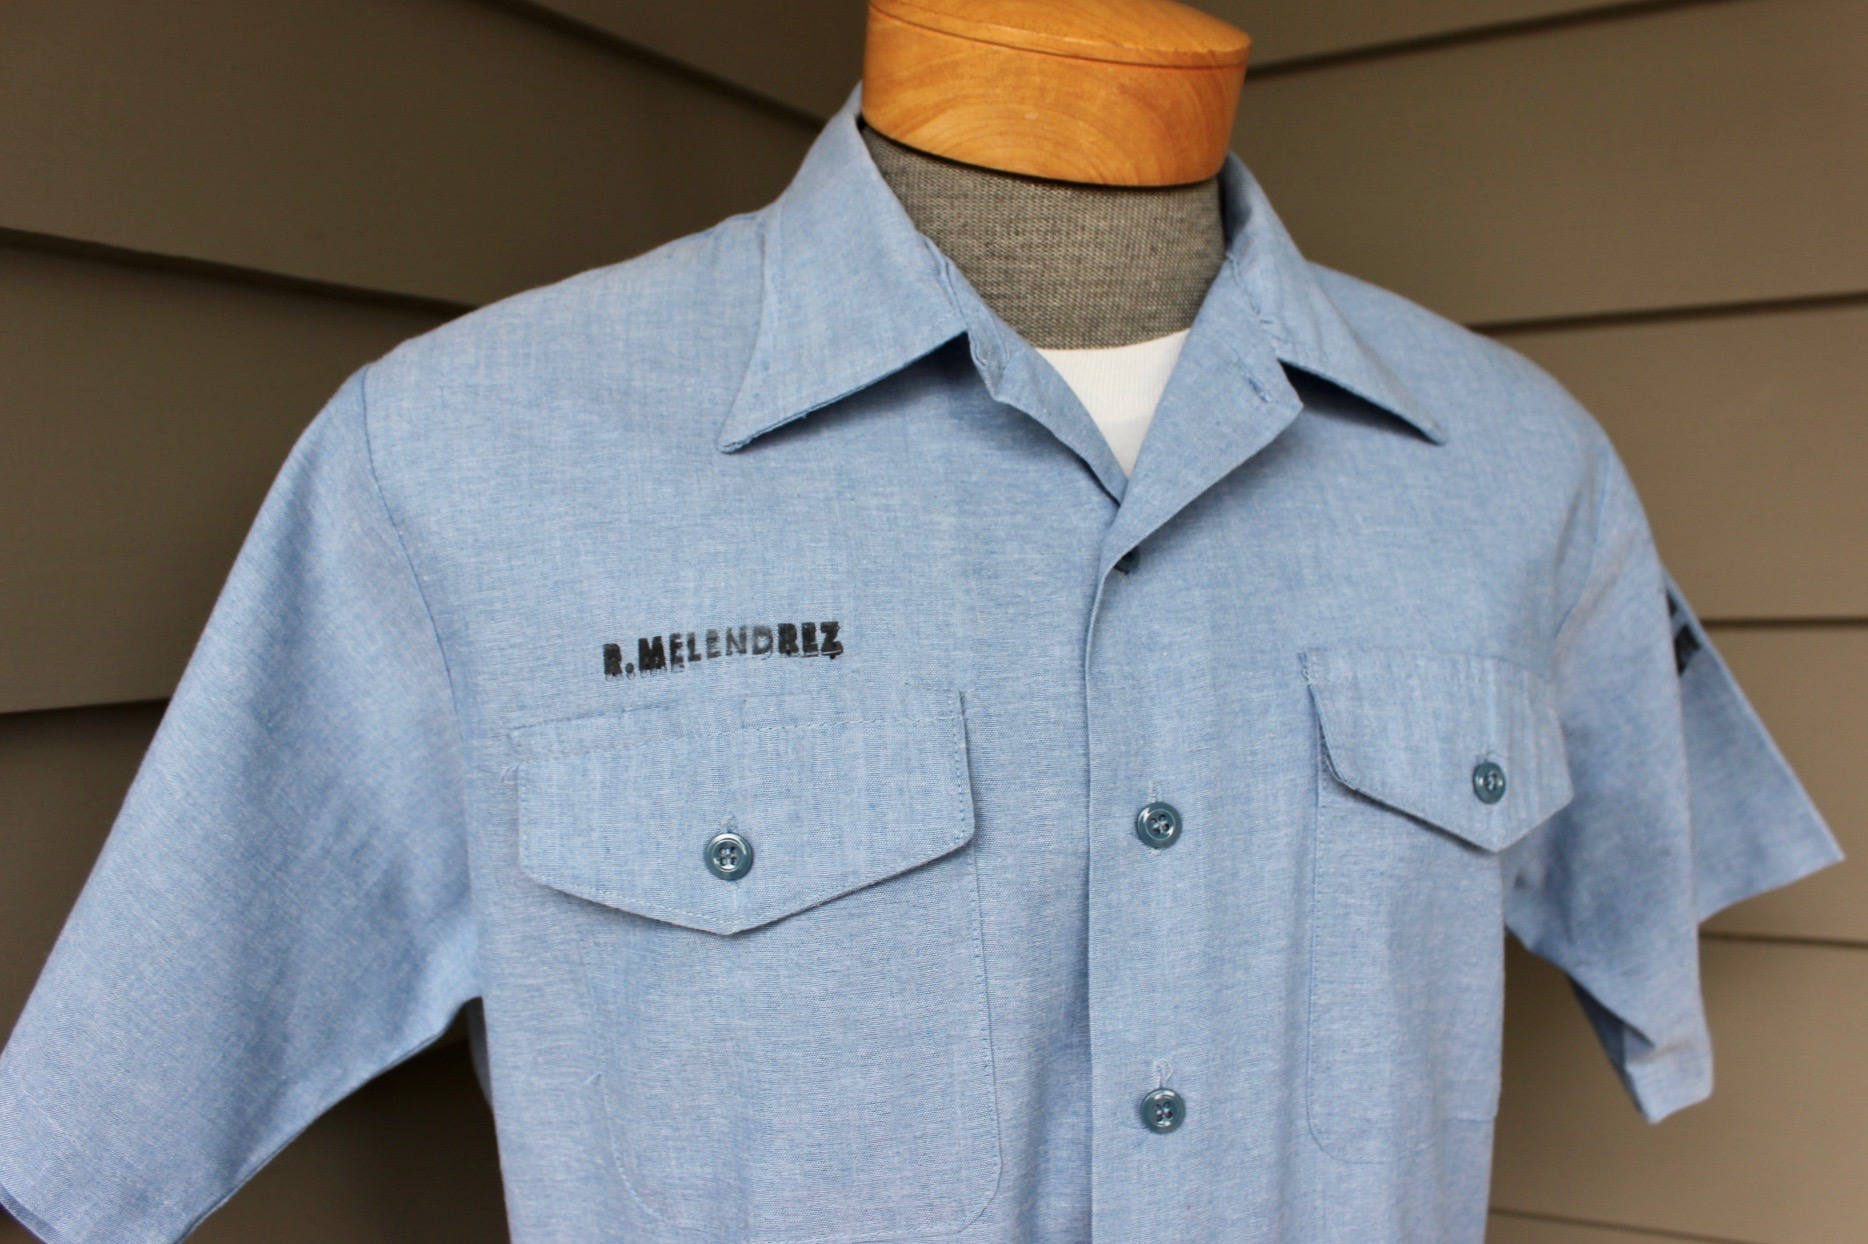 80s vintage thrashed workwear shirt / Ford car mechanic button up / grunge  cotton poly USA work wear uniform name tag Steve costume / XL